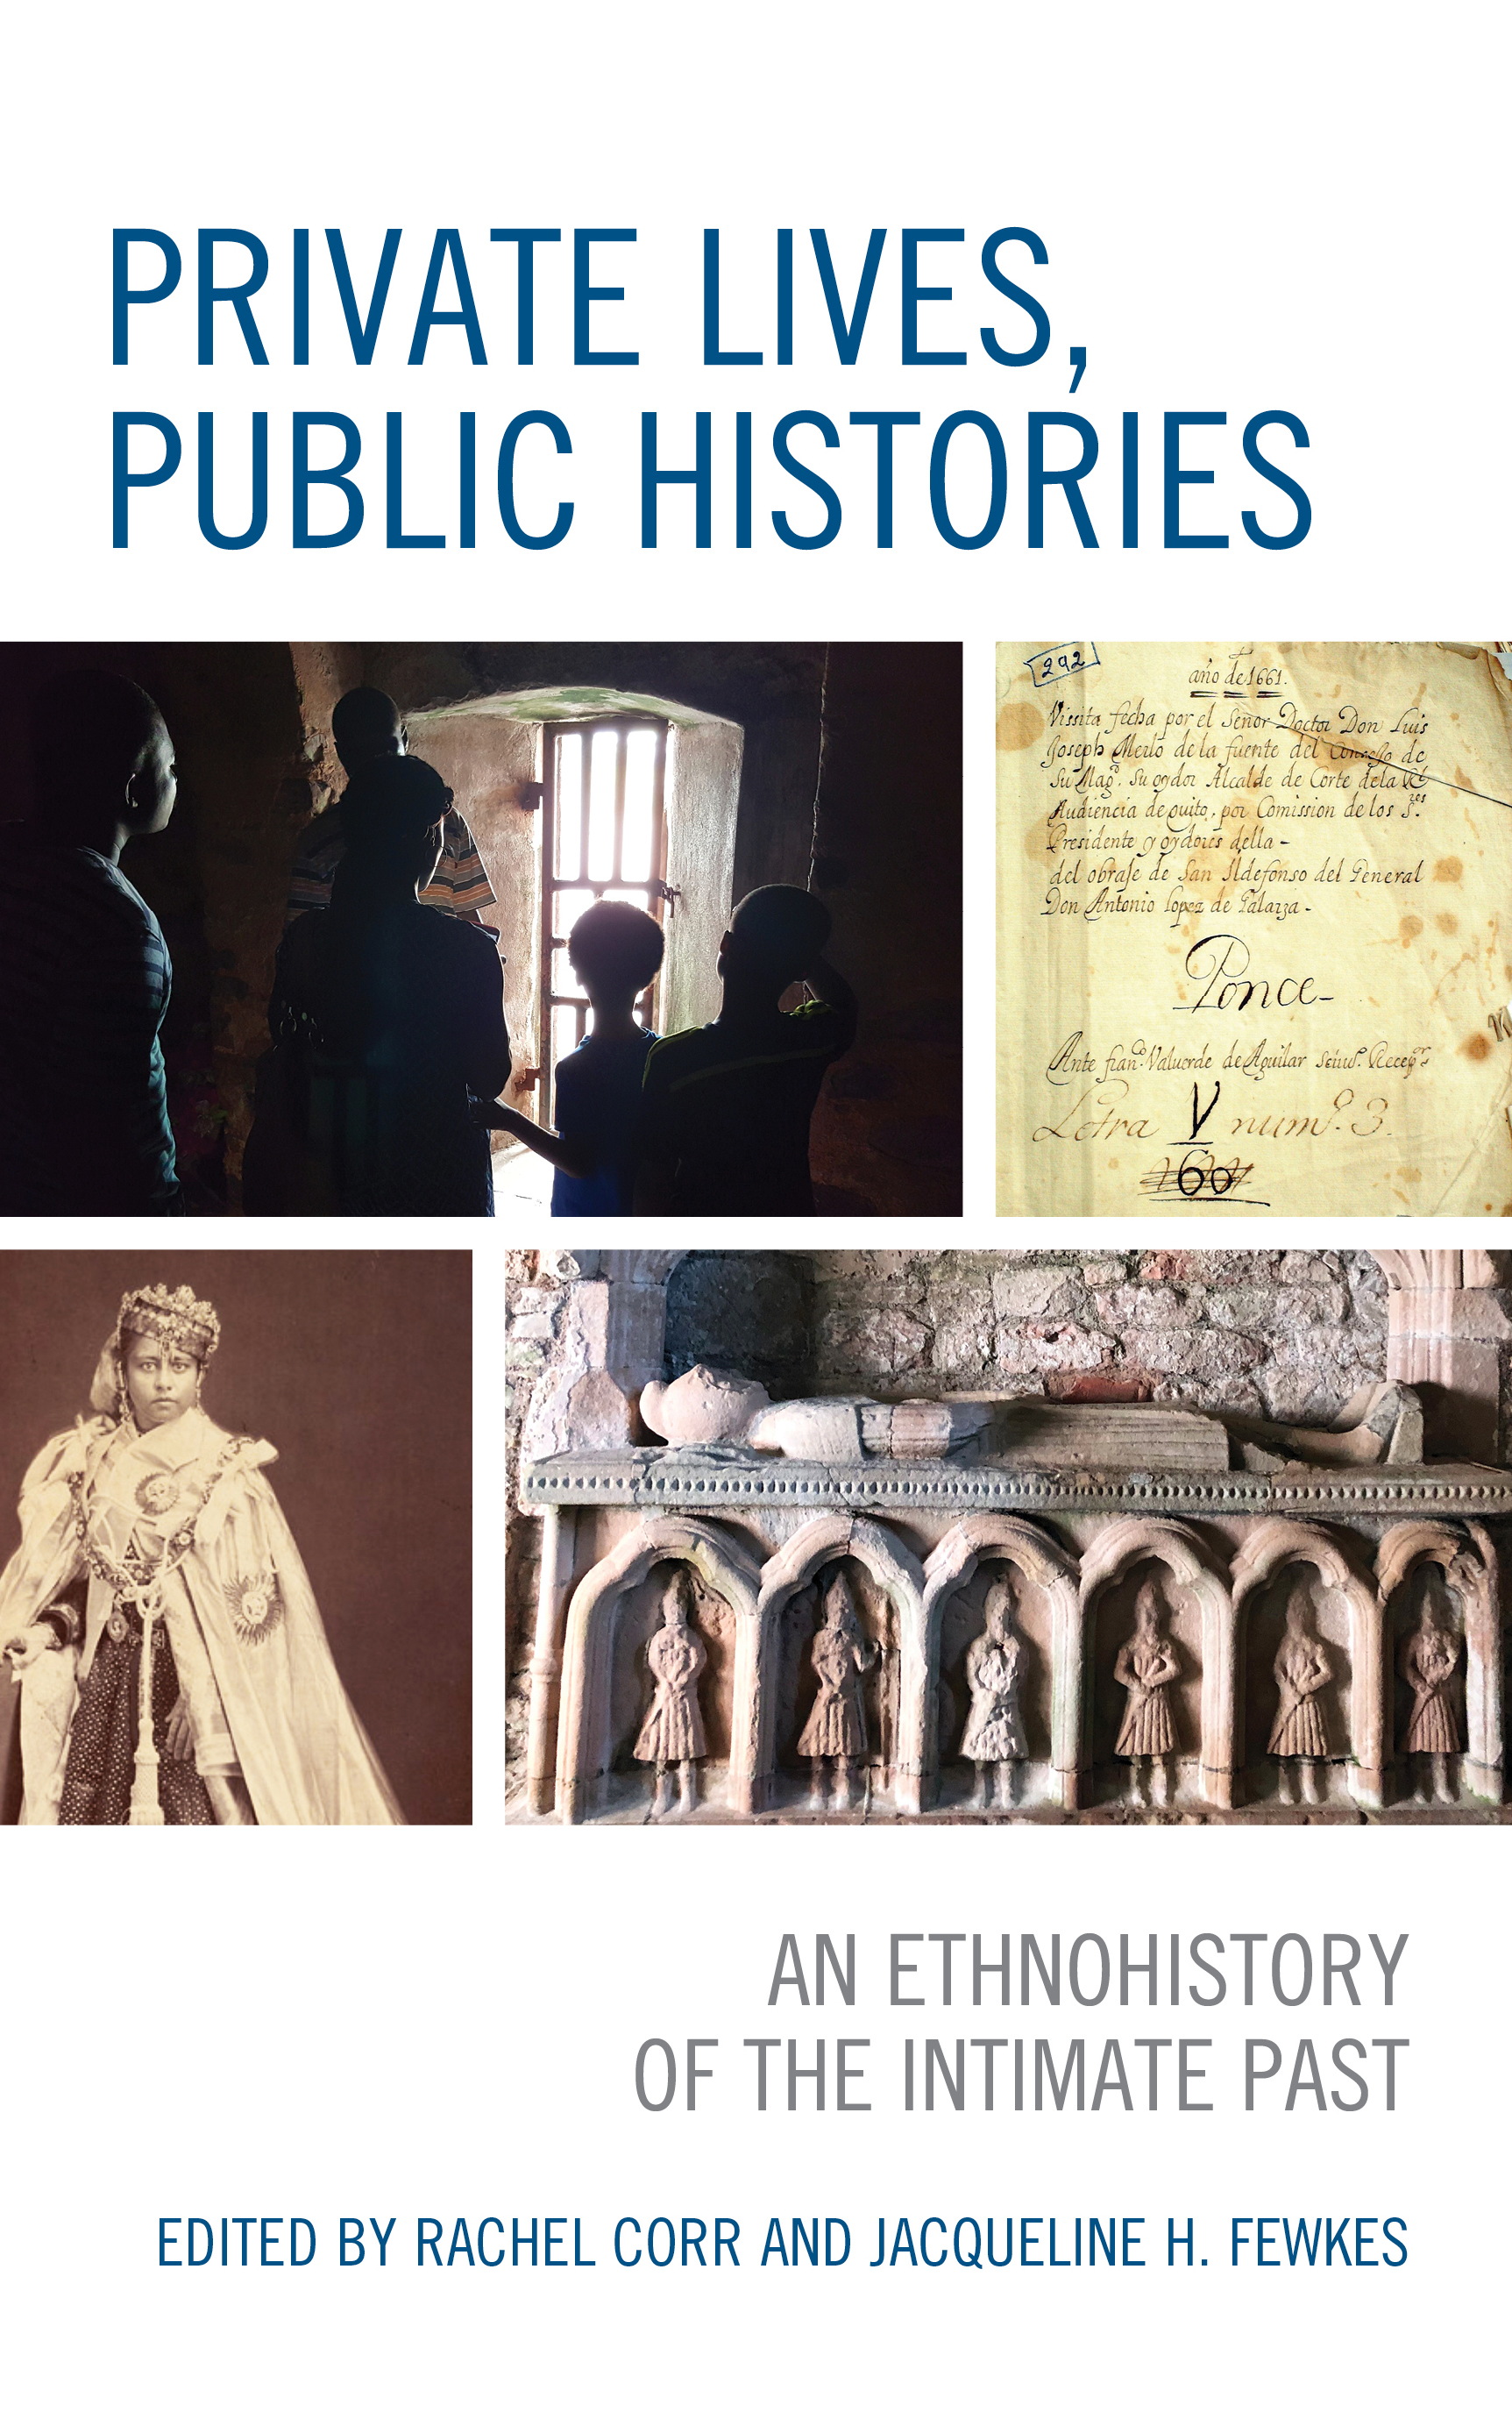 Private Lives, Public Histories: An Ethnohistory of the Intimate Past